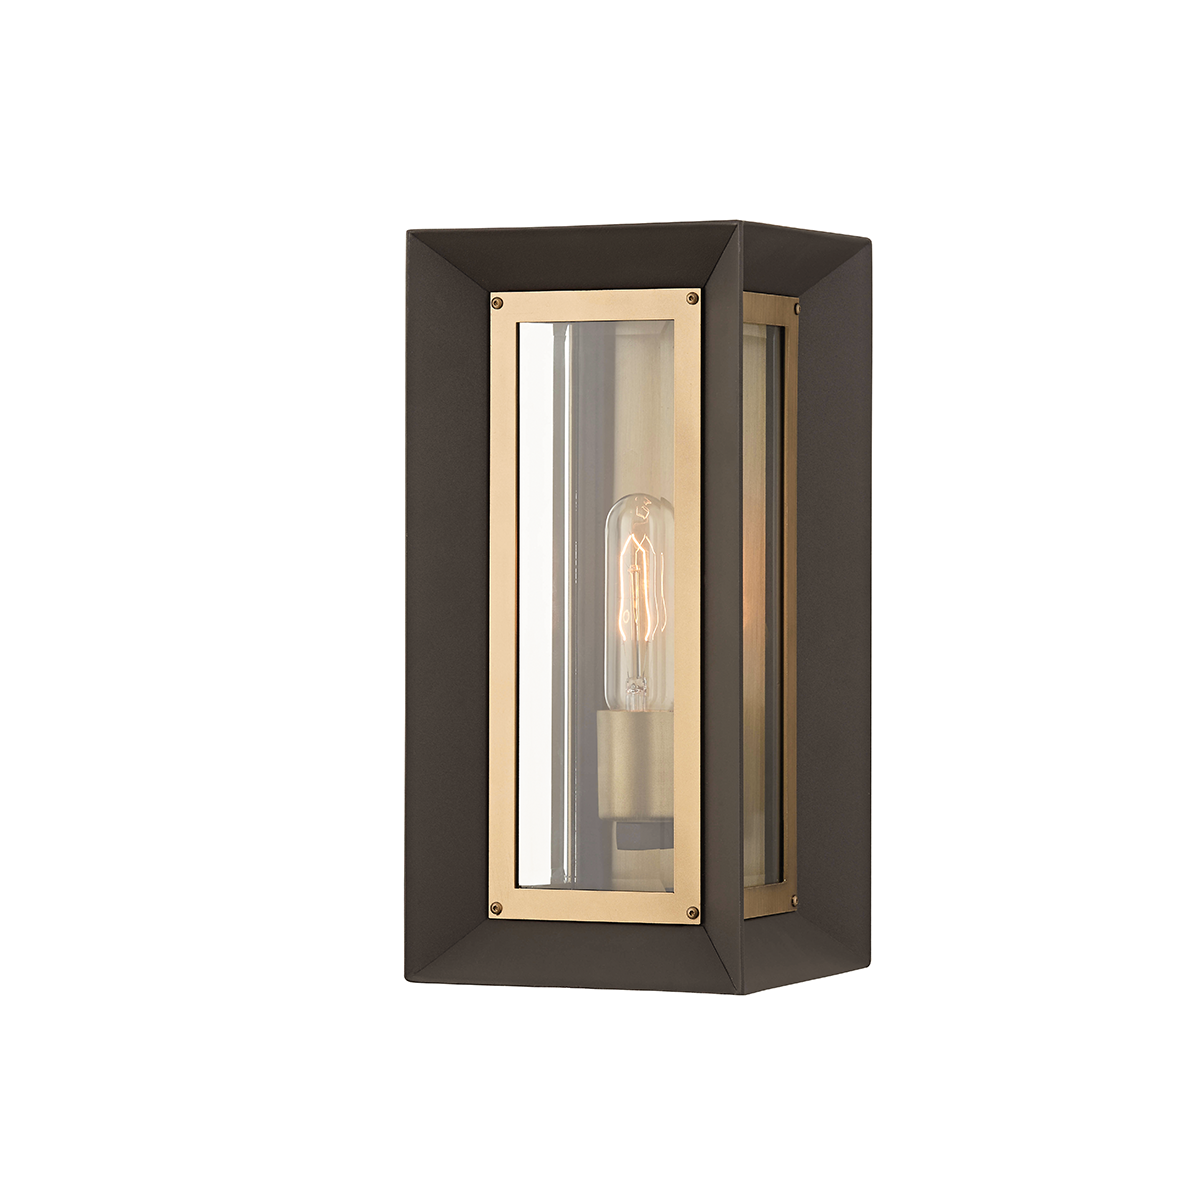 Troy Lighting 1 LIGHT SMALL EXTERIOR WALL SCONCE B4051 Outdoor l Wall Troy Lighting   